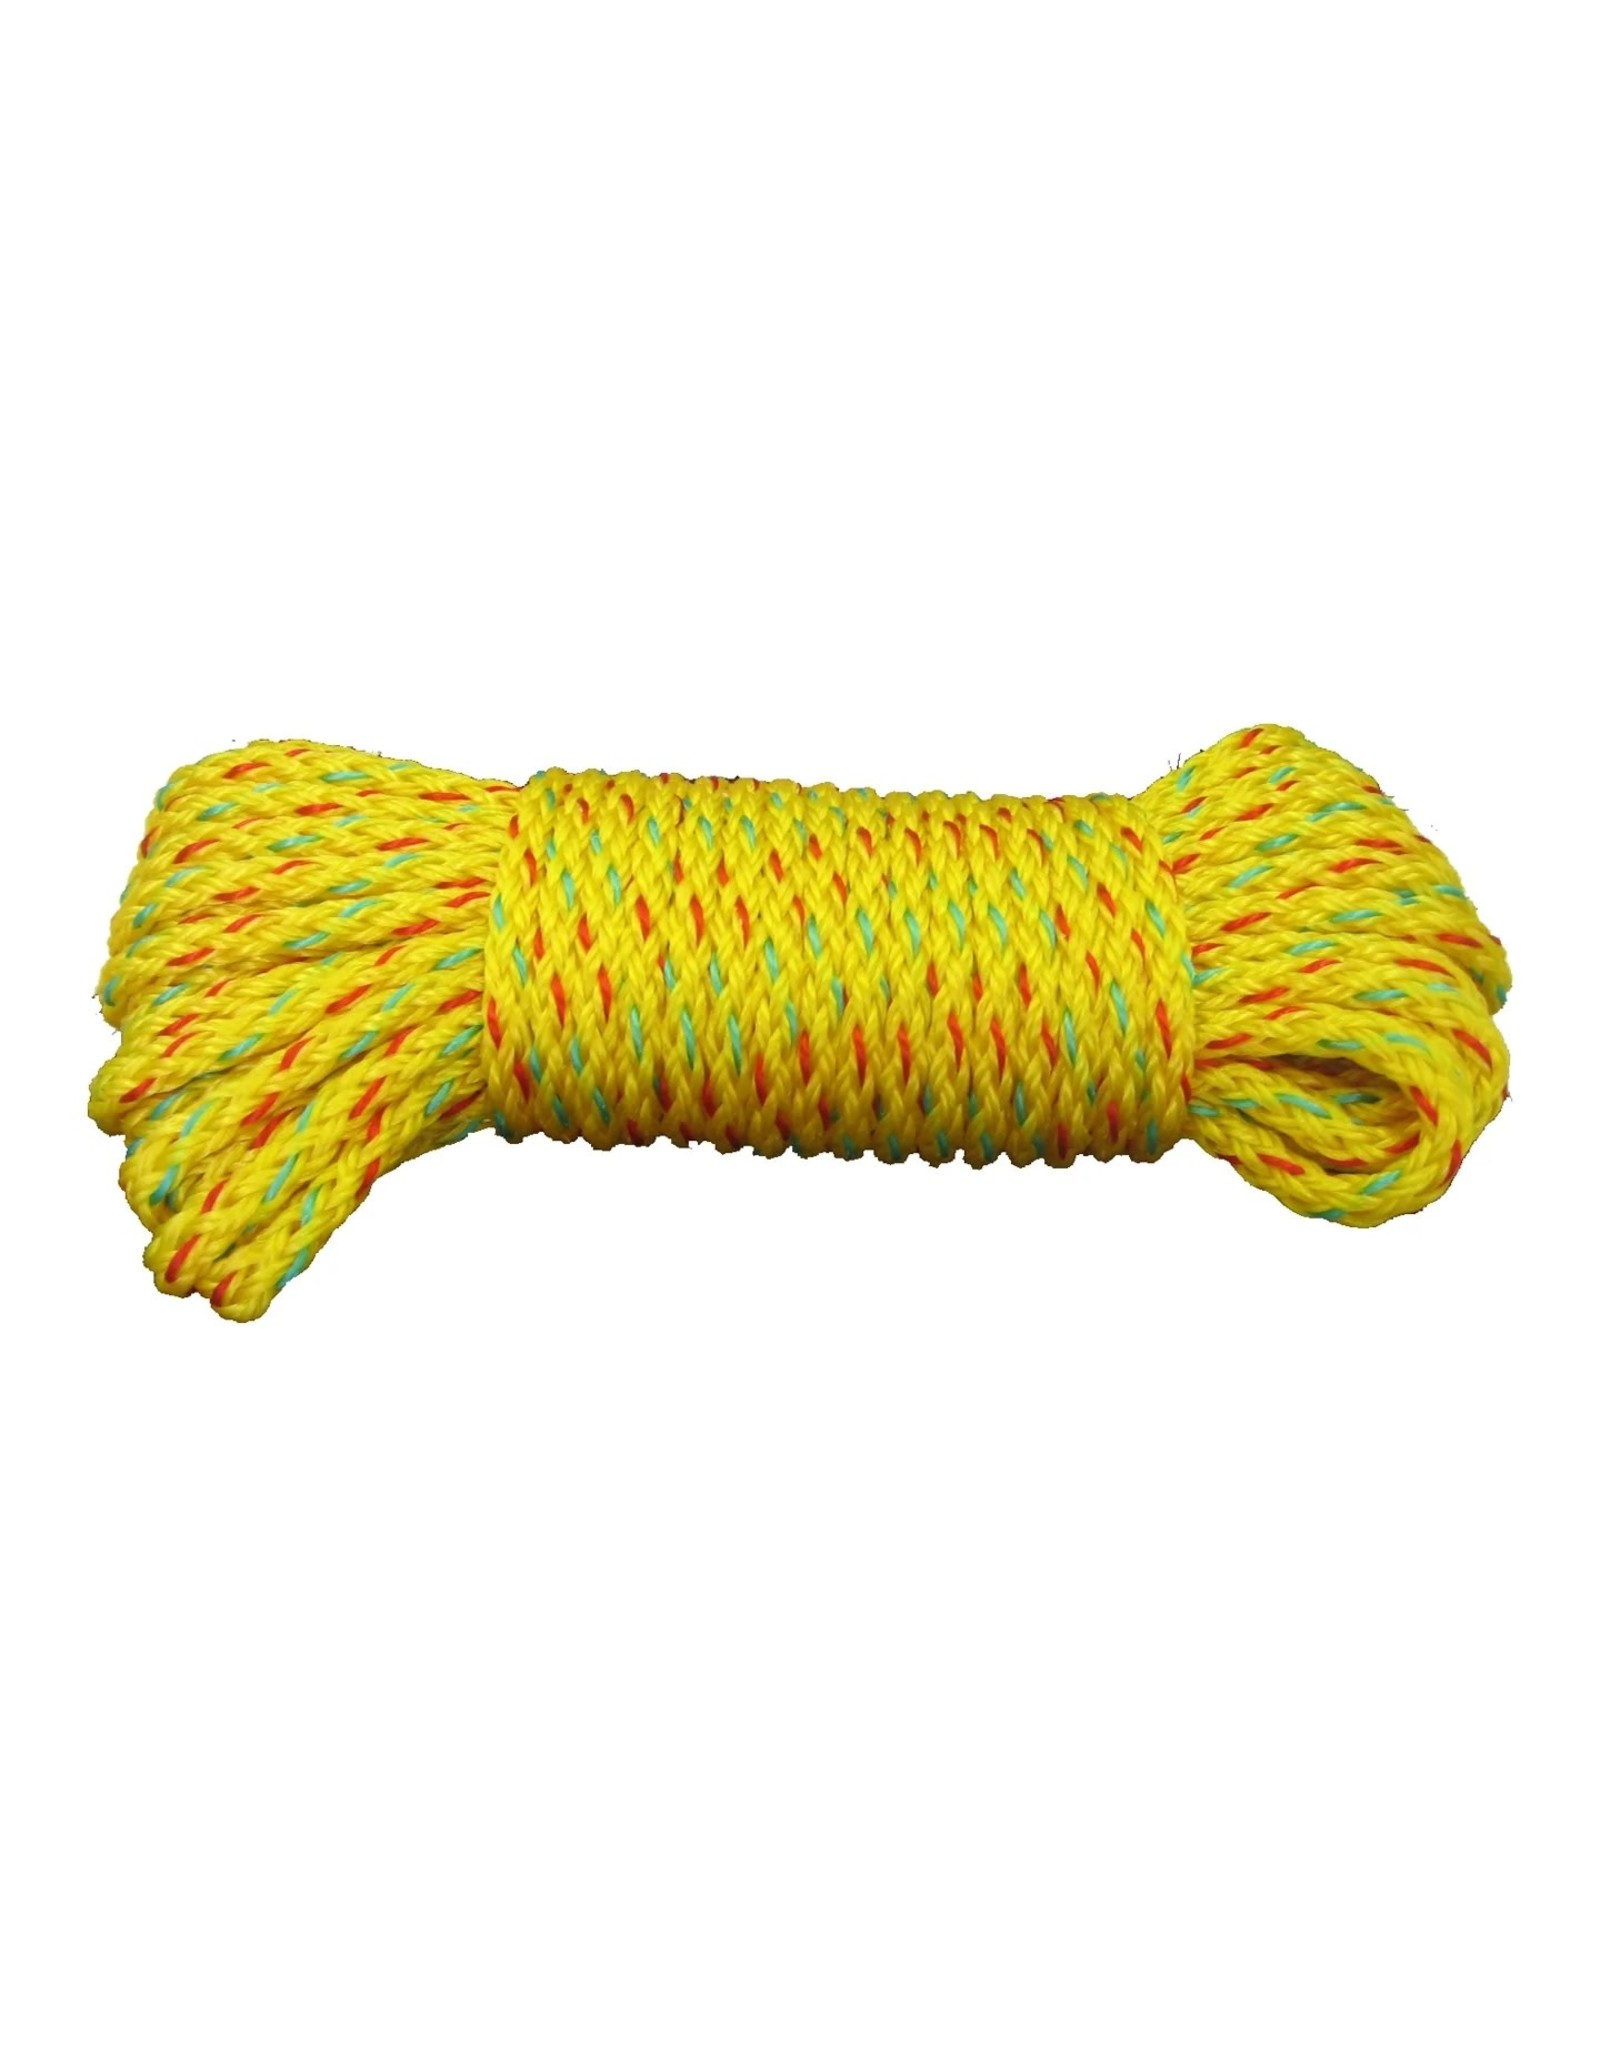 Promar 75 FT, 1/2 Braided Lobster Rope - Yellow - Pure Watersports